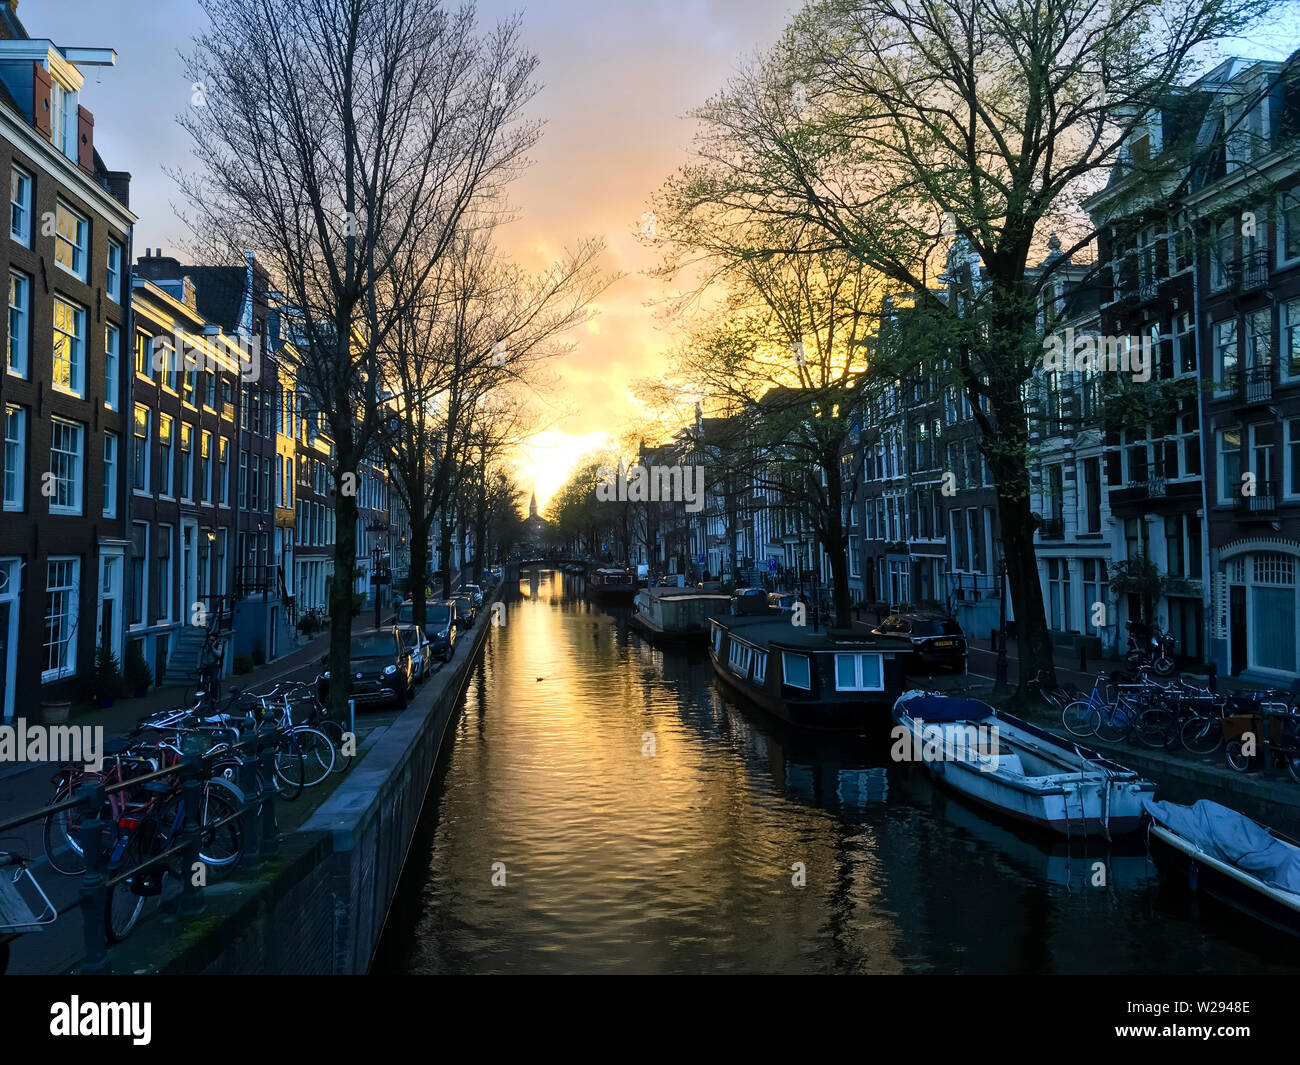 The winter sun is rising on an old town canal in Amsterdam's historic Jordaan residential neighbourhood. Stock Photo